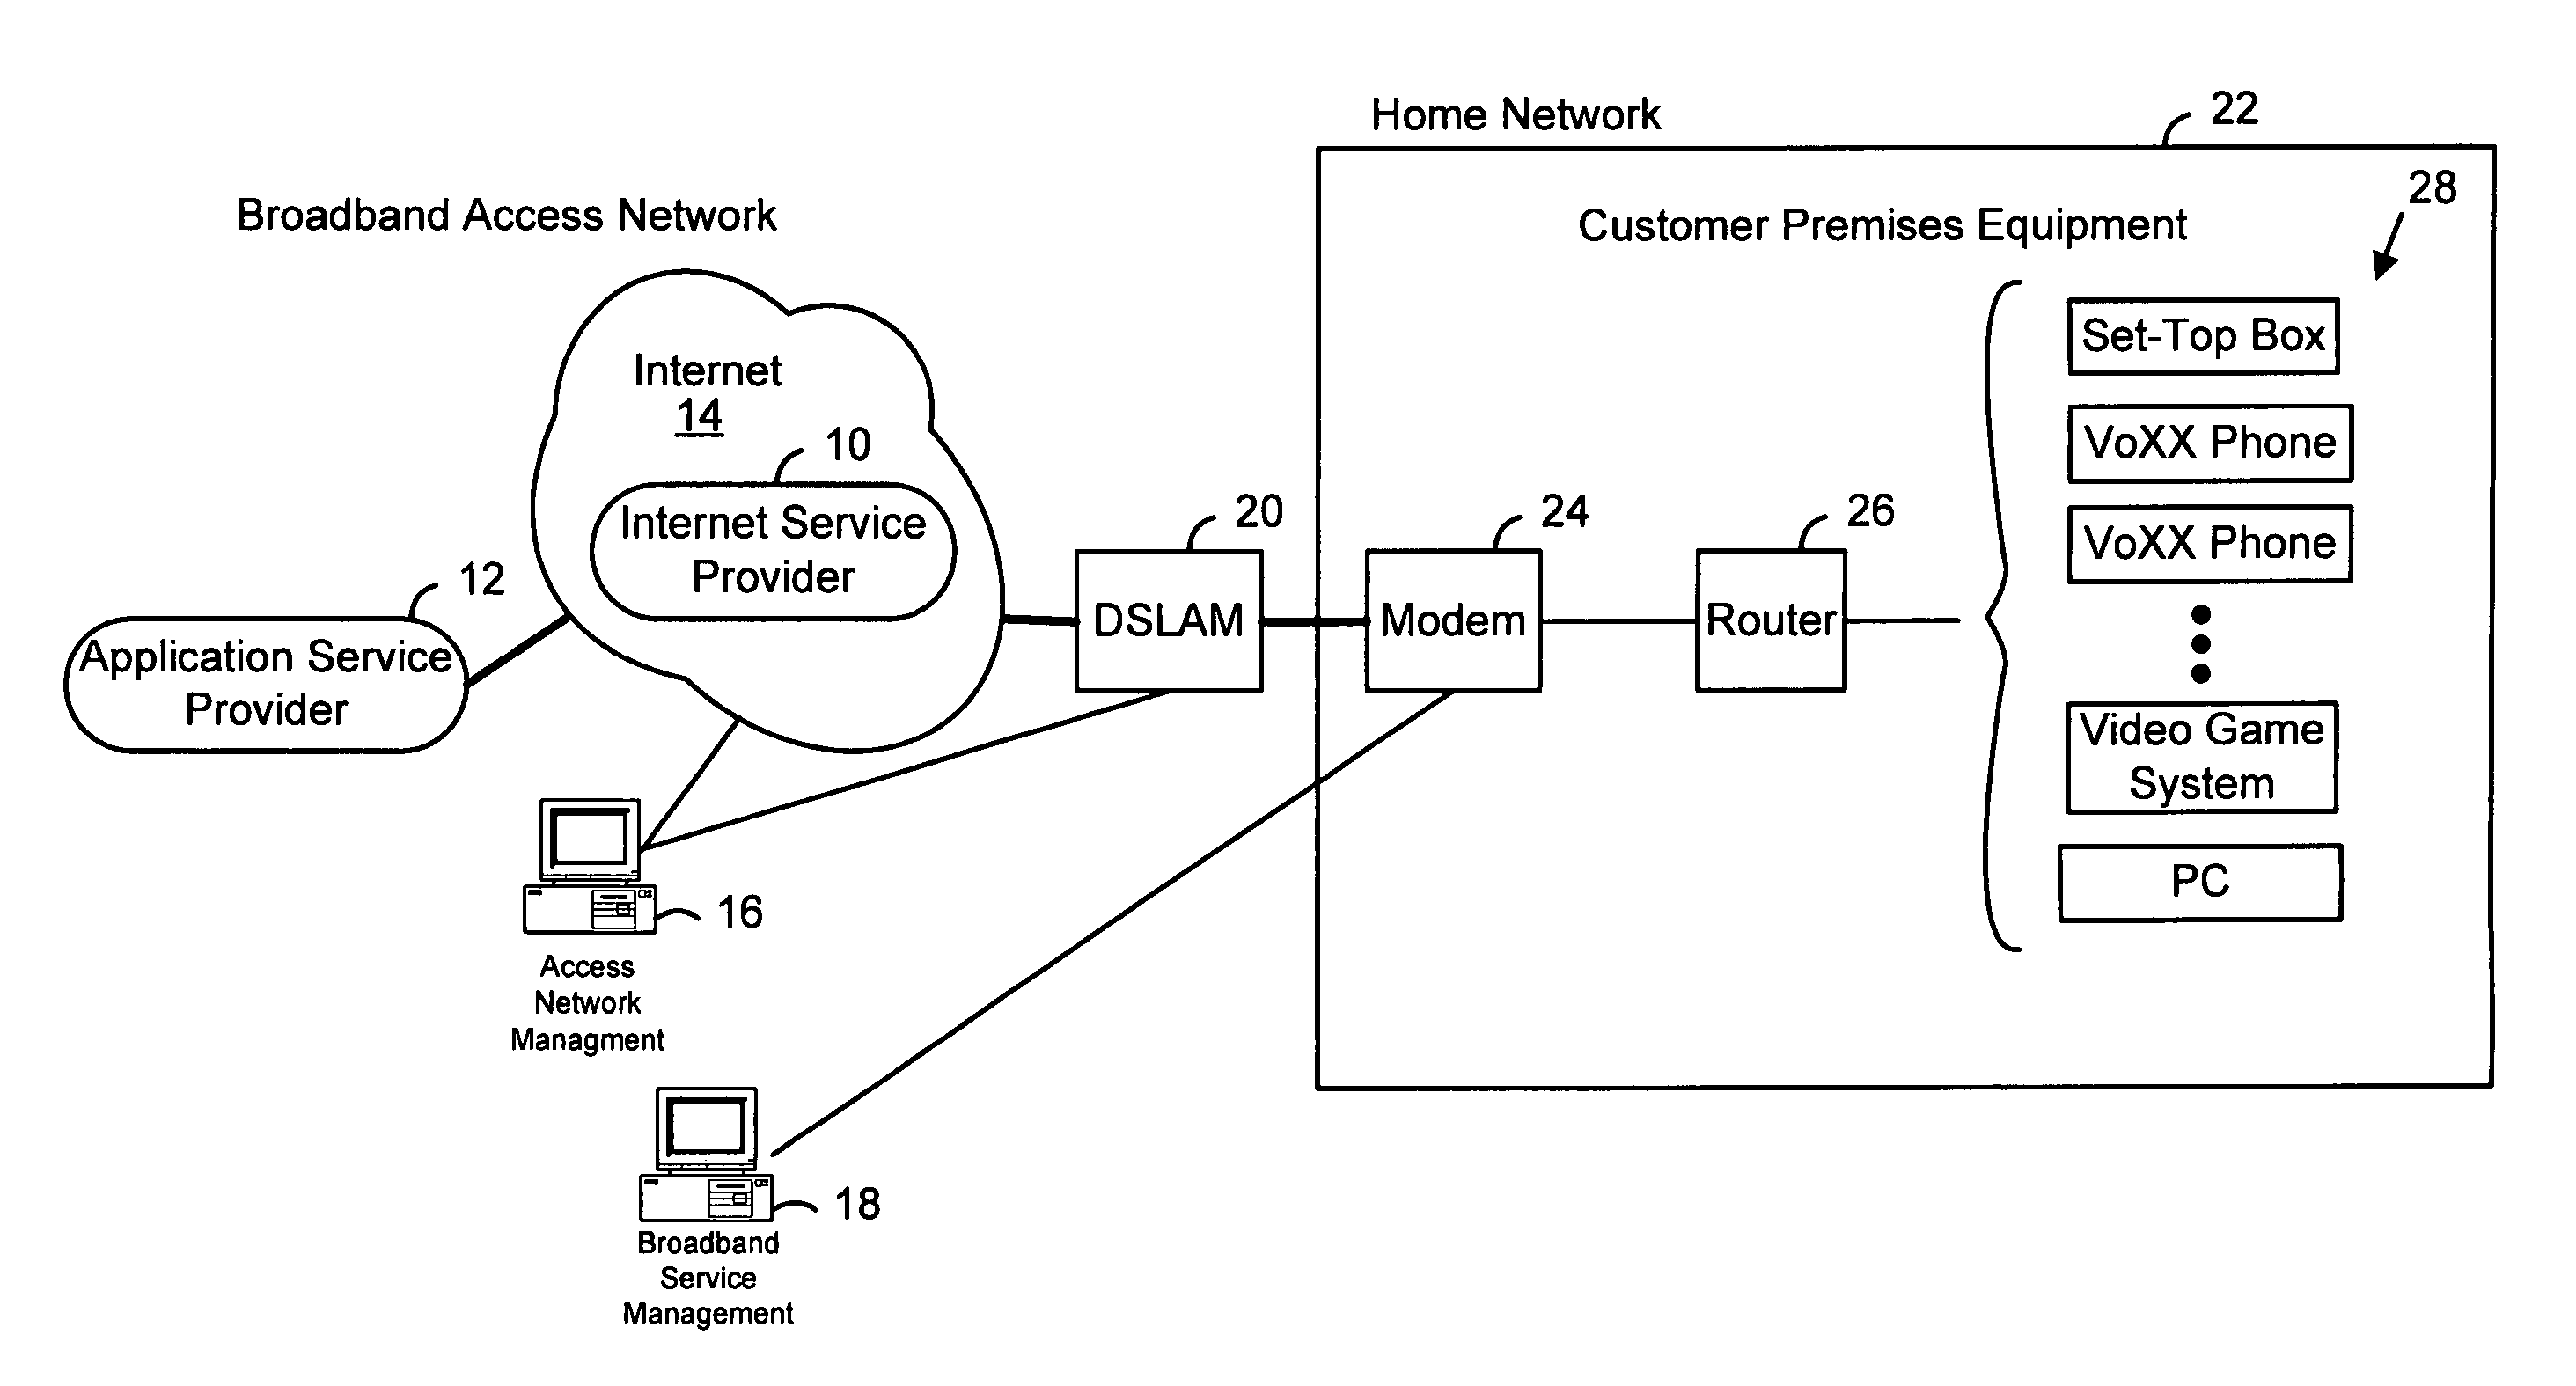 Local provisioning of bandwidth and other network resources